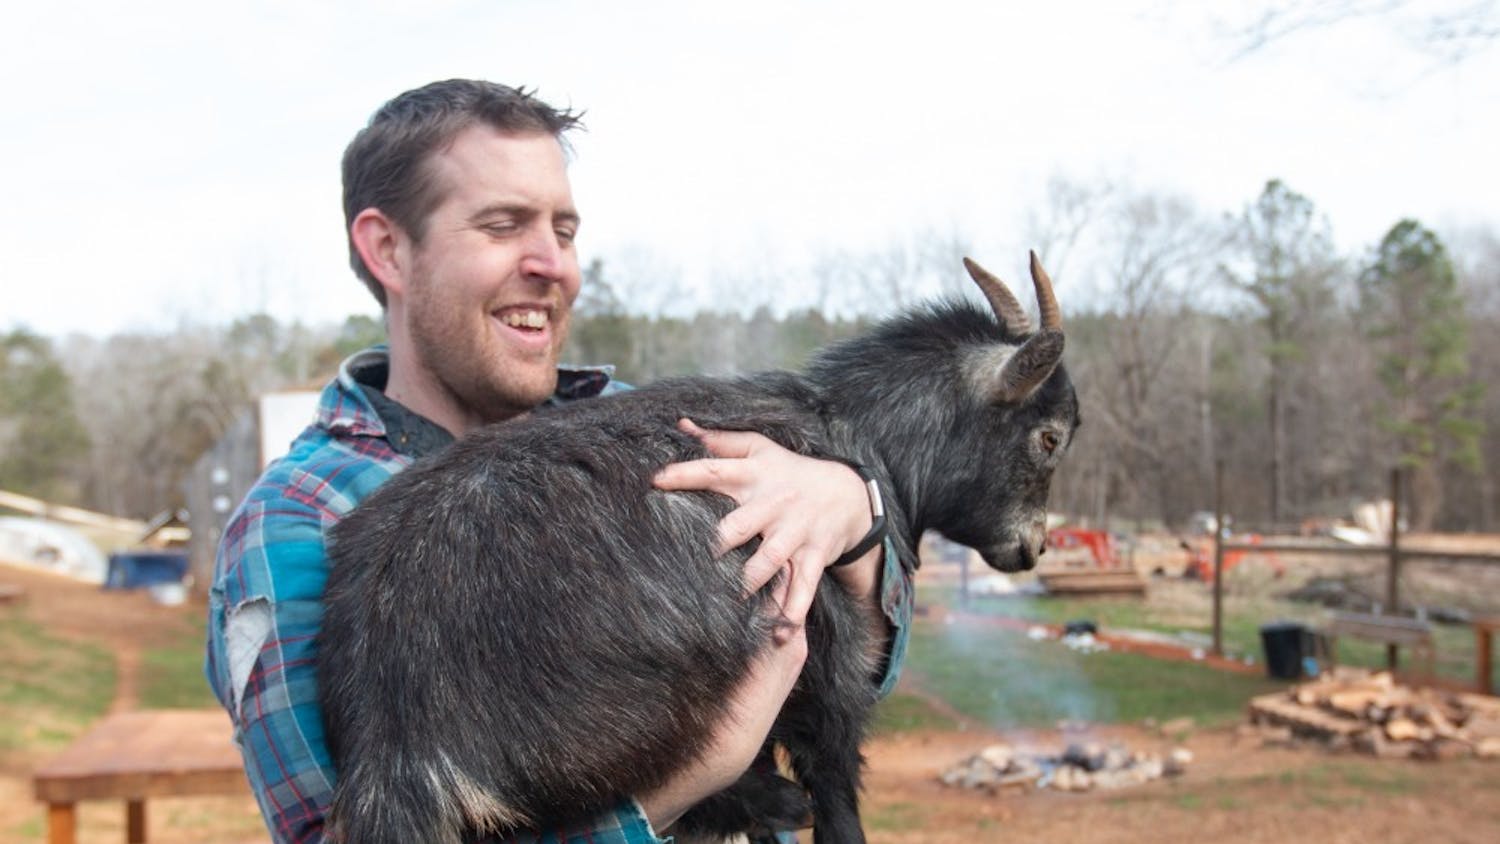 Snuggling baby goats this Valentine's Day 